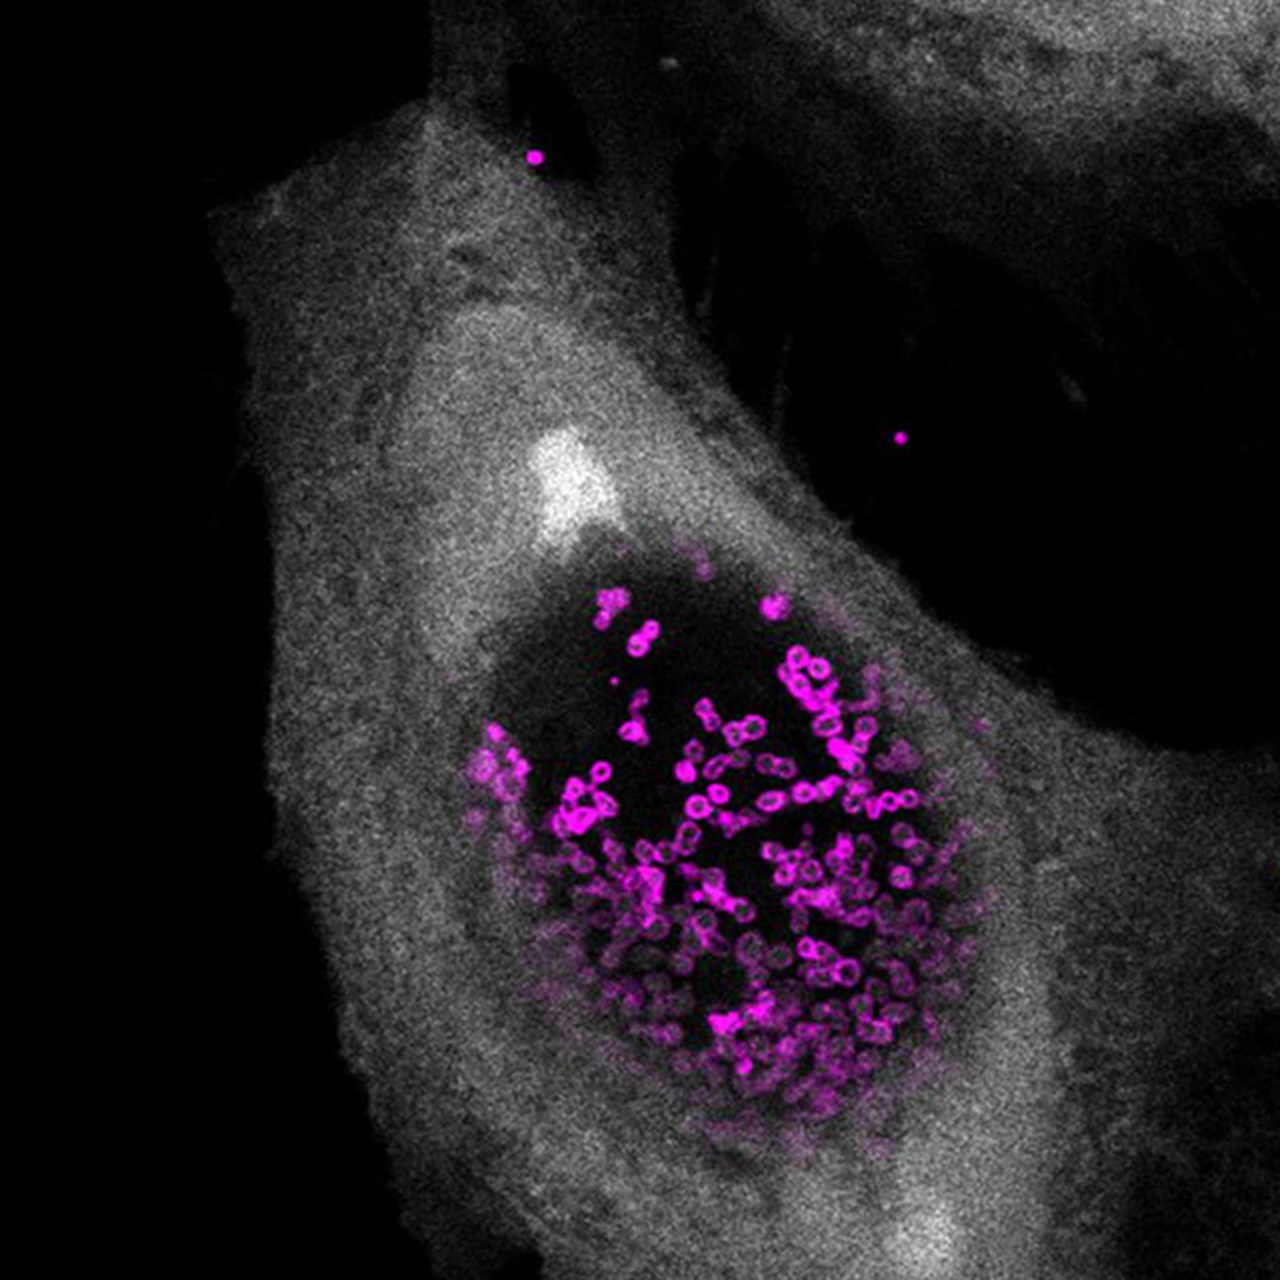 Caption: Confocal fluorescence microscopic image displaying a human cell (gray) infected with Chlamydia trachomatis (magenta).